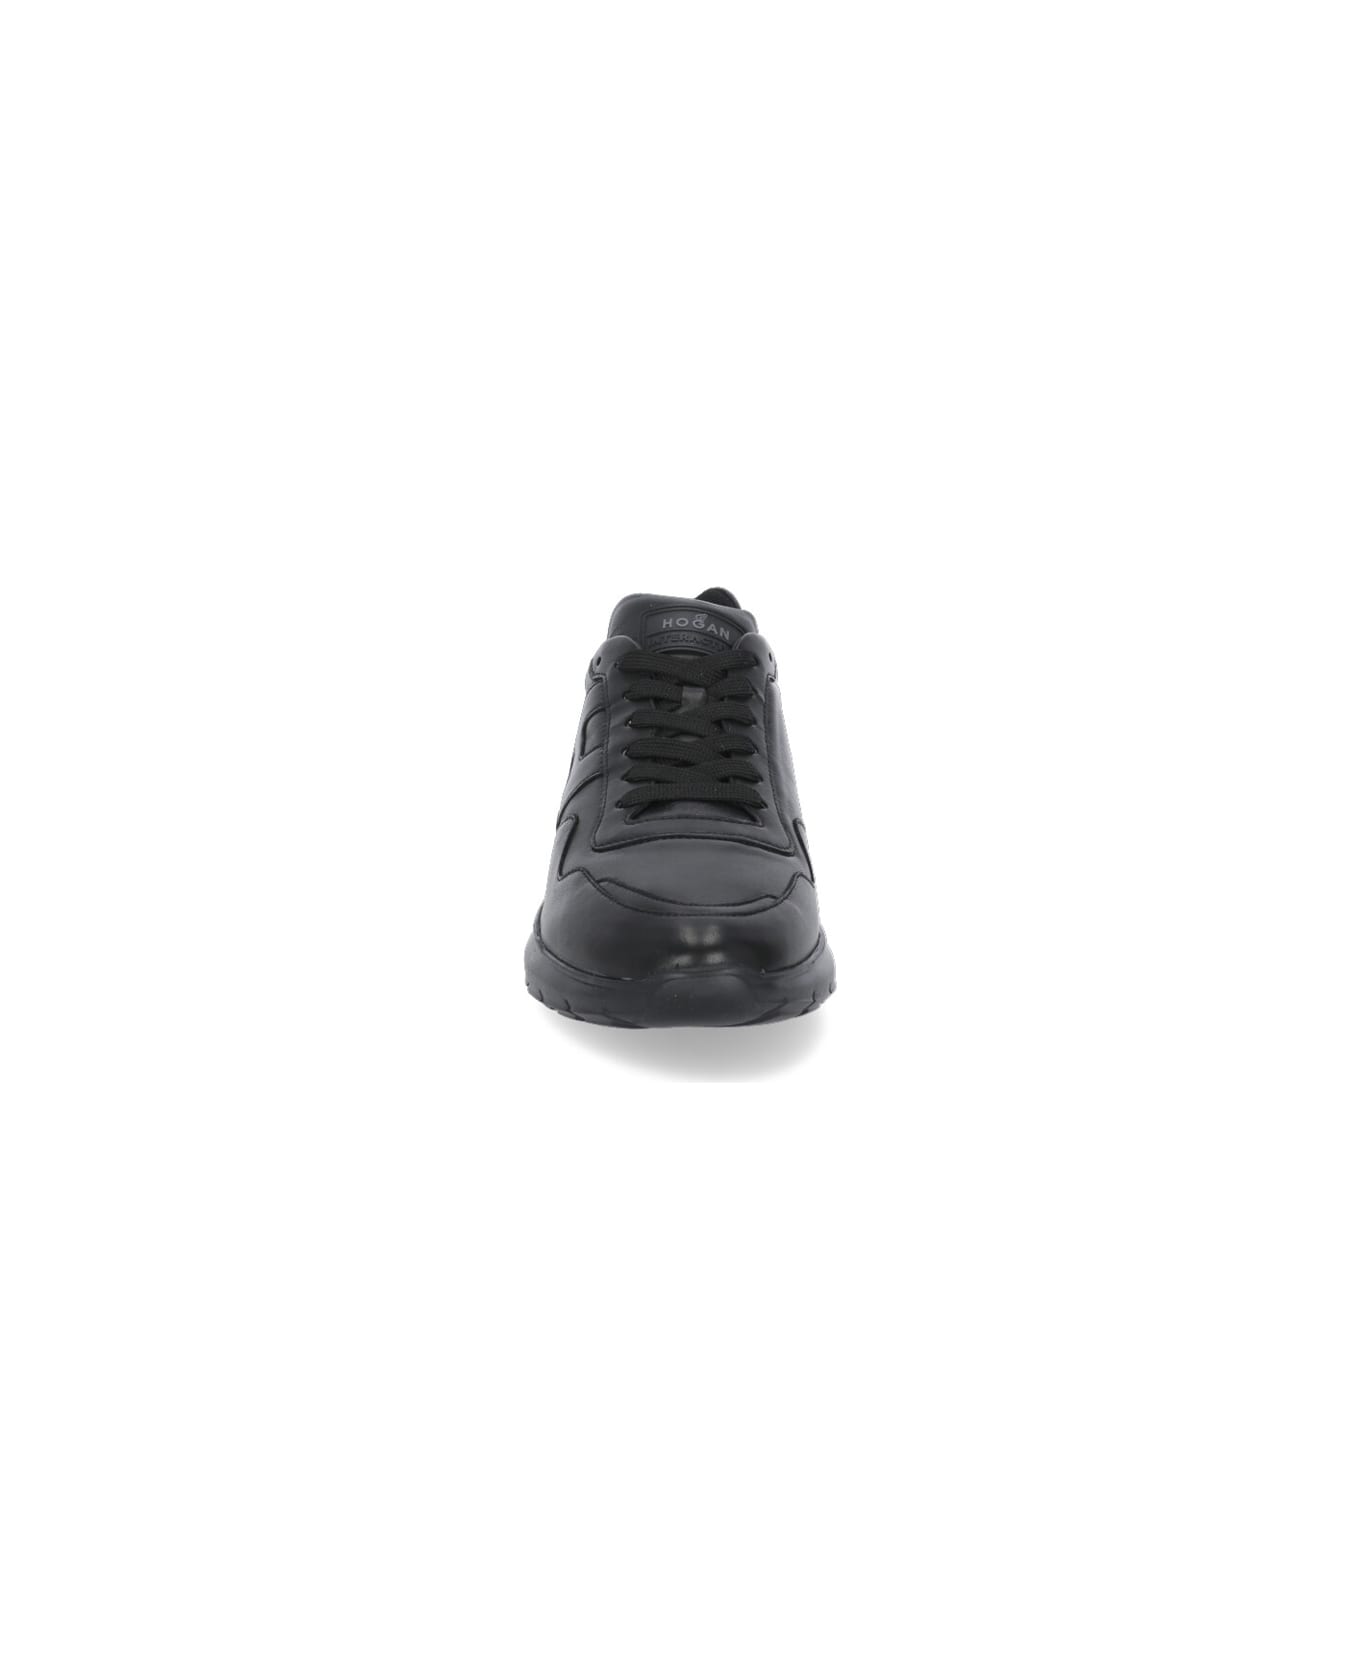 Hogan Sneakers "interactive³" In Leather - Black